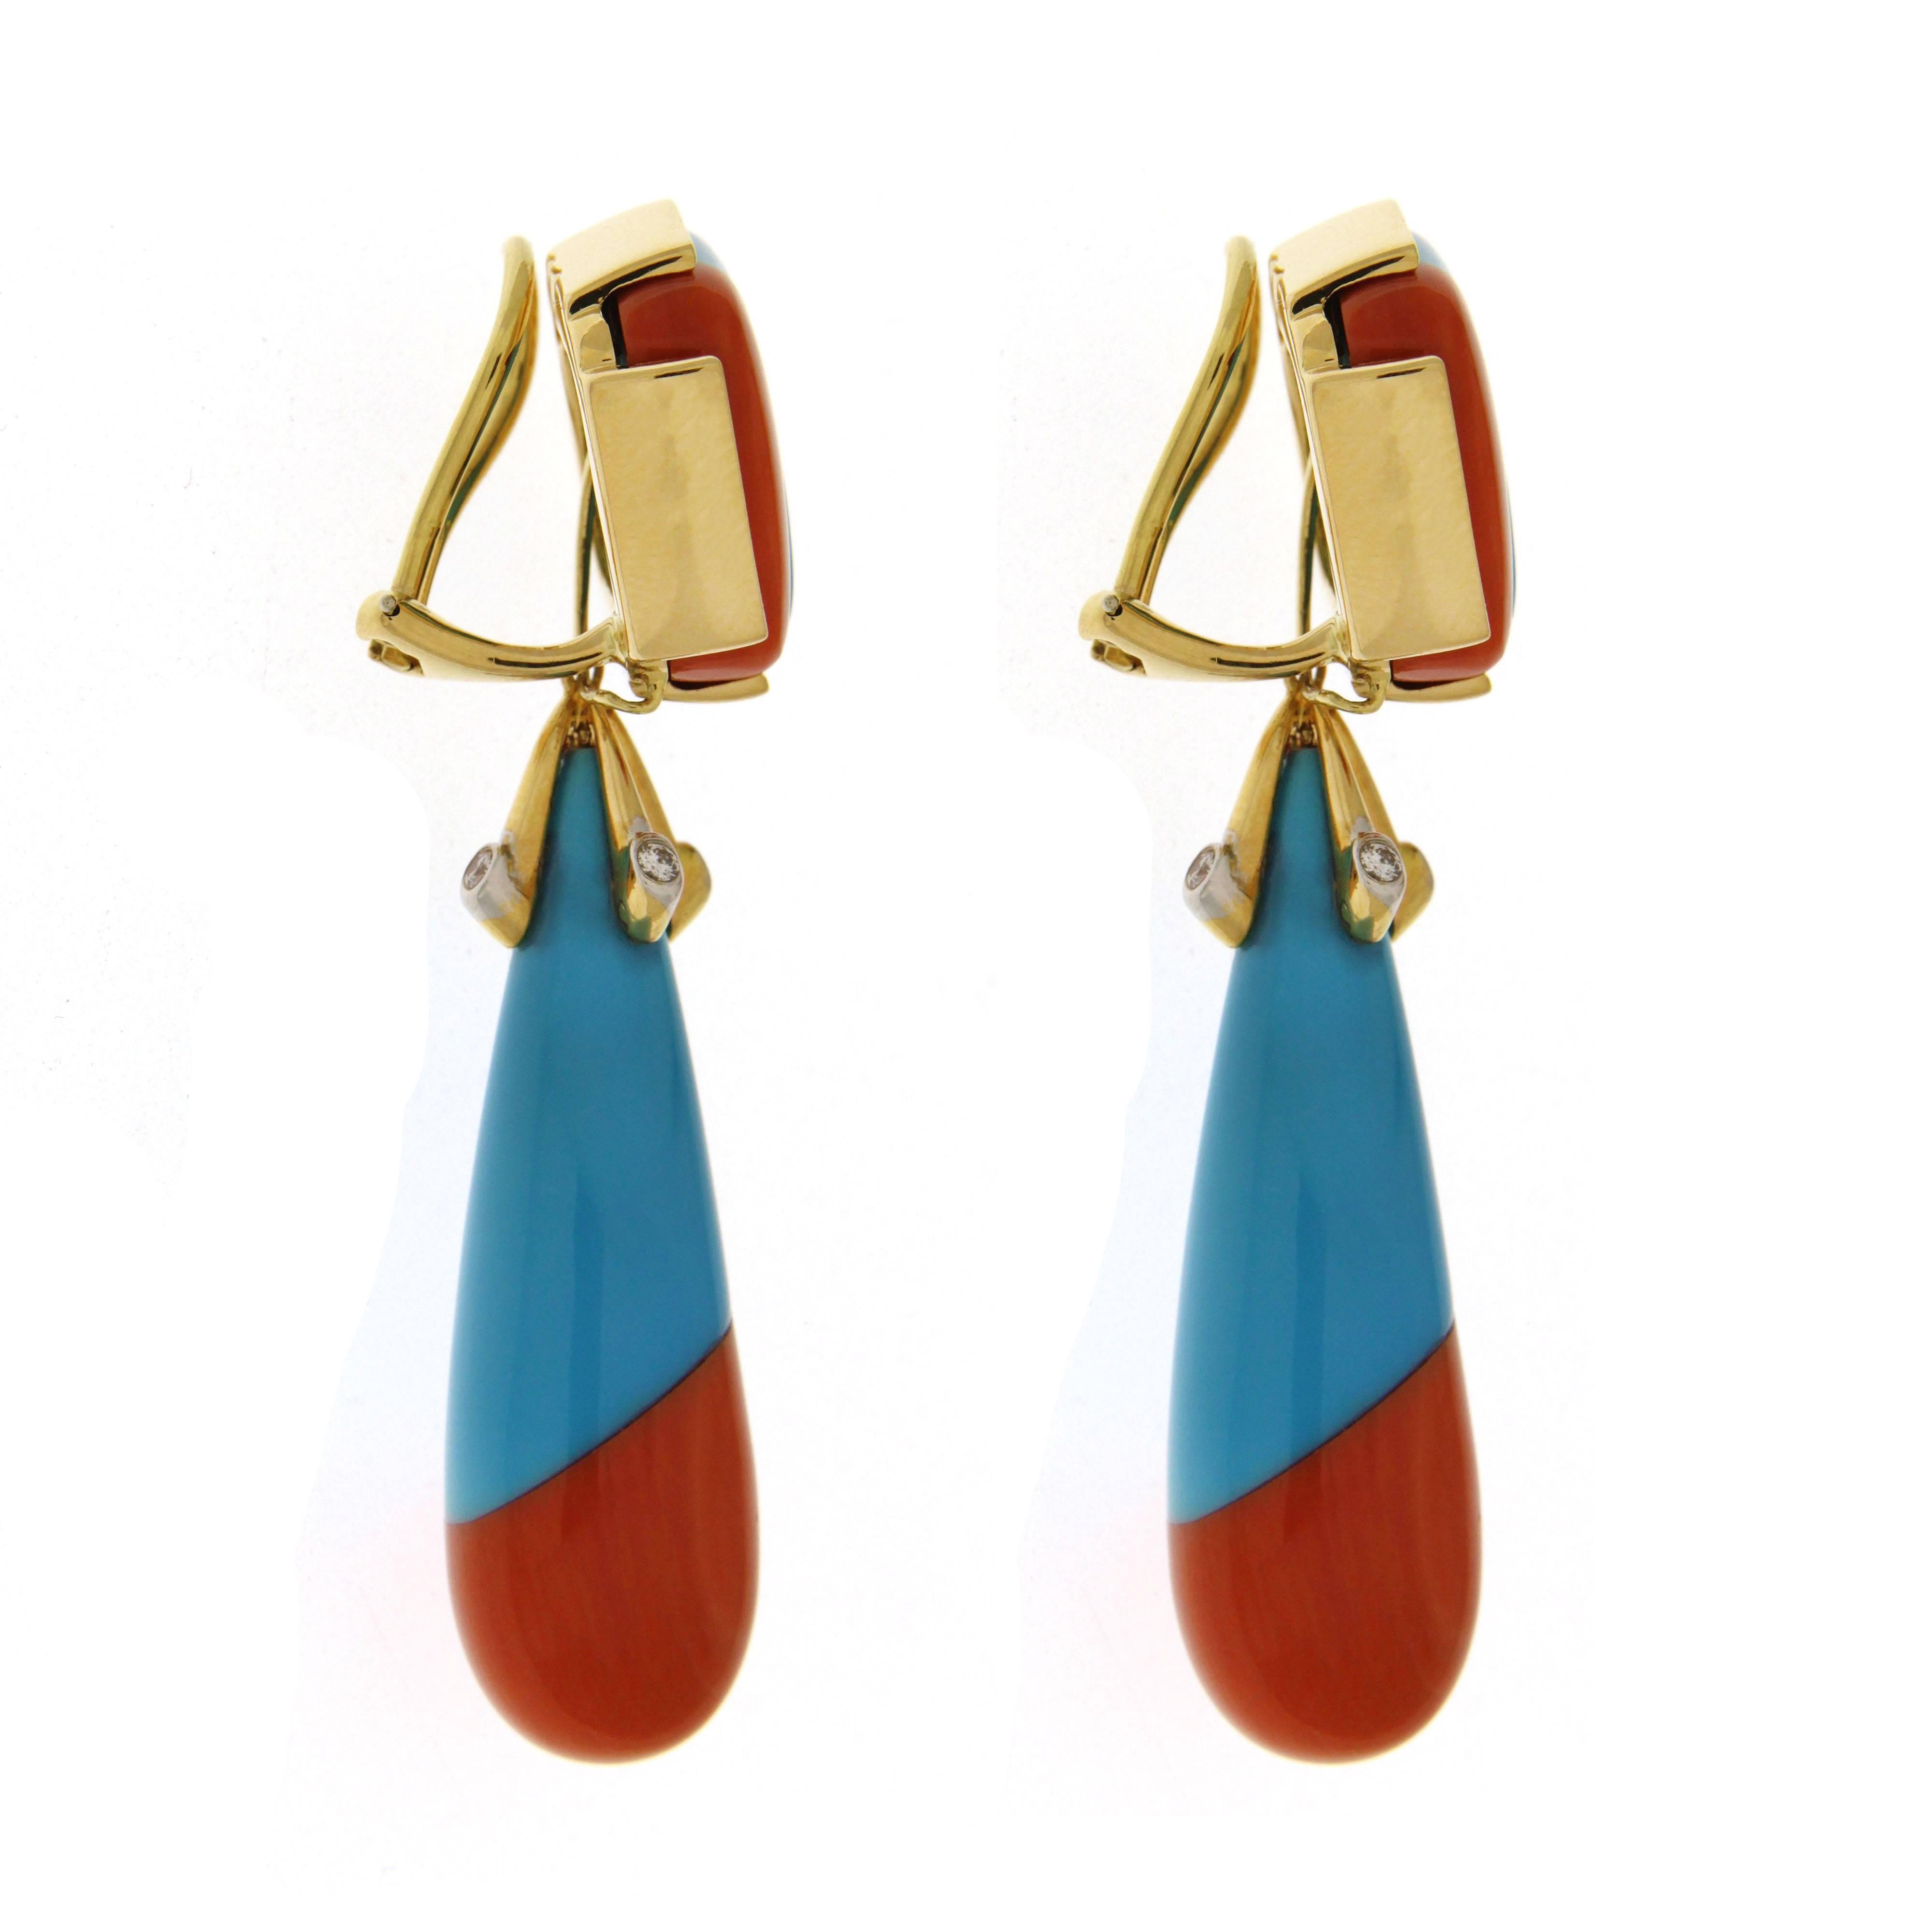 This unique pair of earrings features special cut two tone Turquoise and Coral Cushion with signature gold bar setting and Drop connected with dangling Bezel set Diamond caps. Diamond Total Weight is around 0.19 ctw